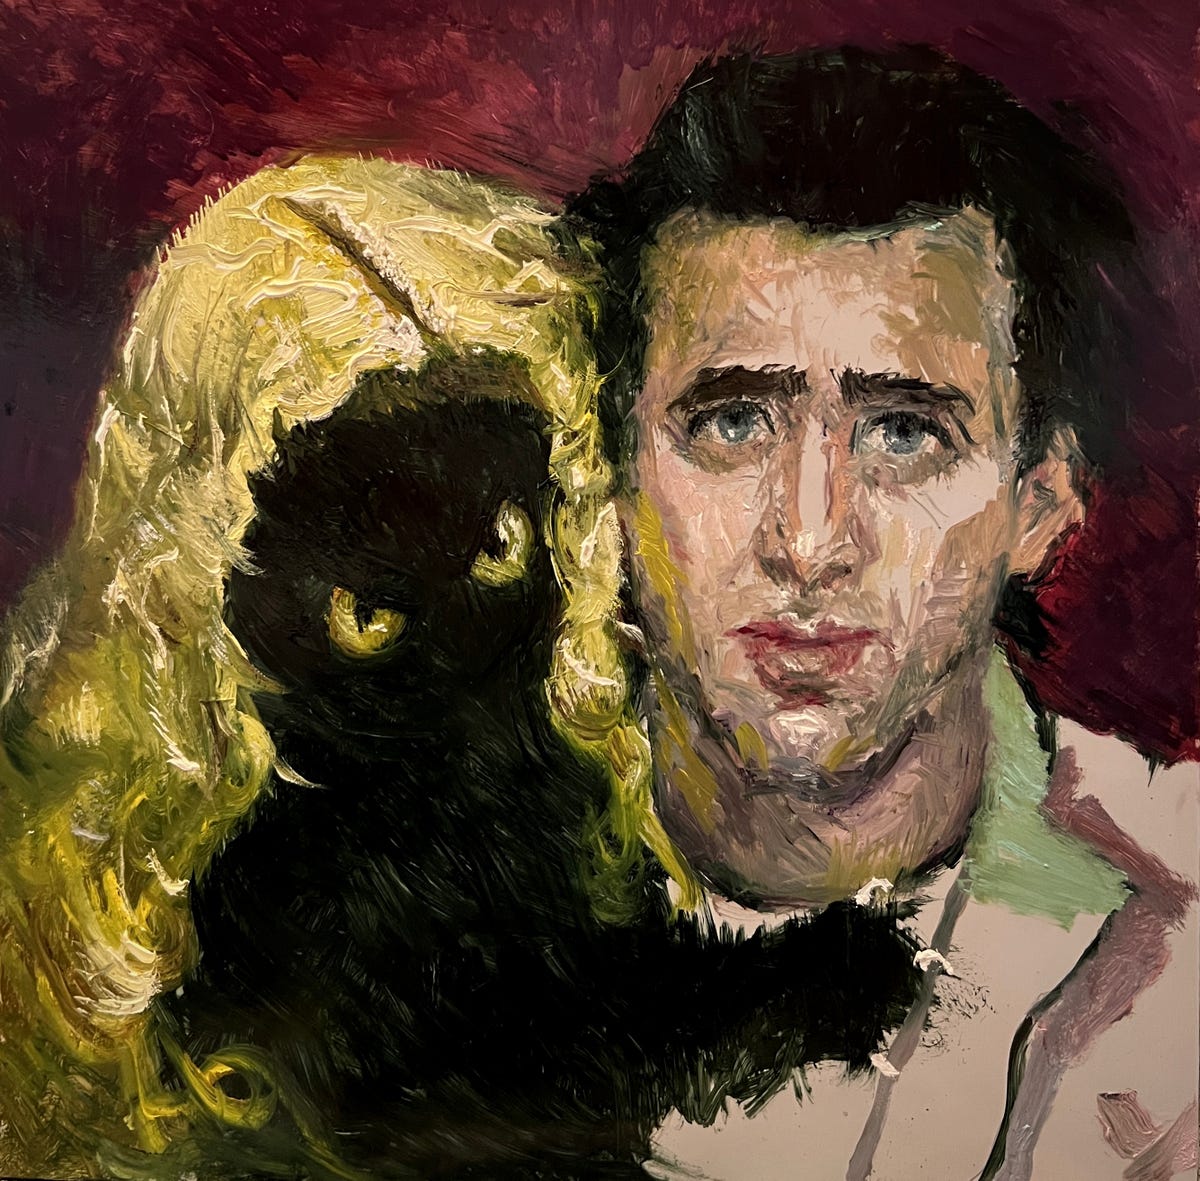 Wild at Art oil painting showing Nic Cage embracing a yellow-eyed black cat